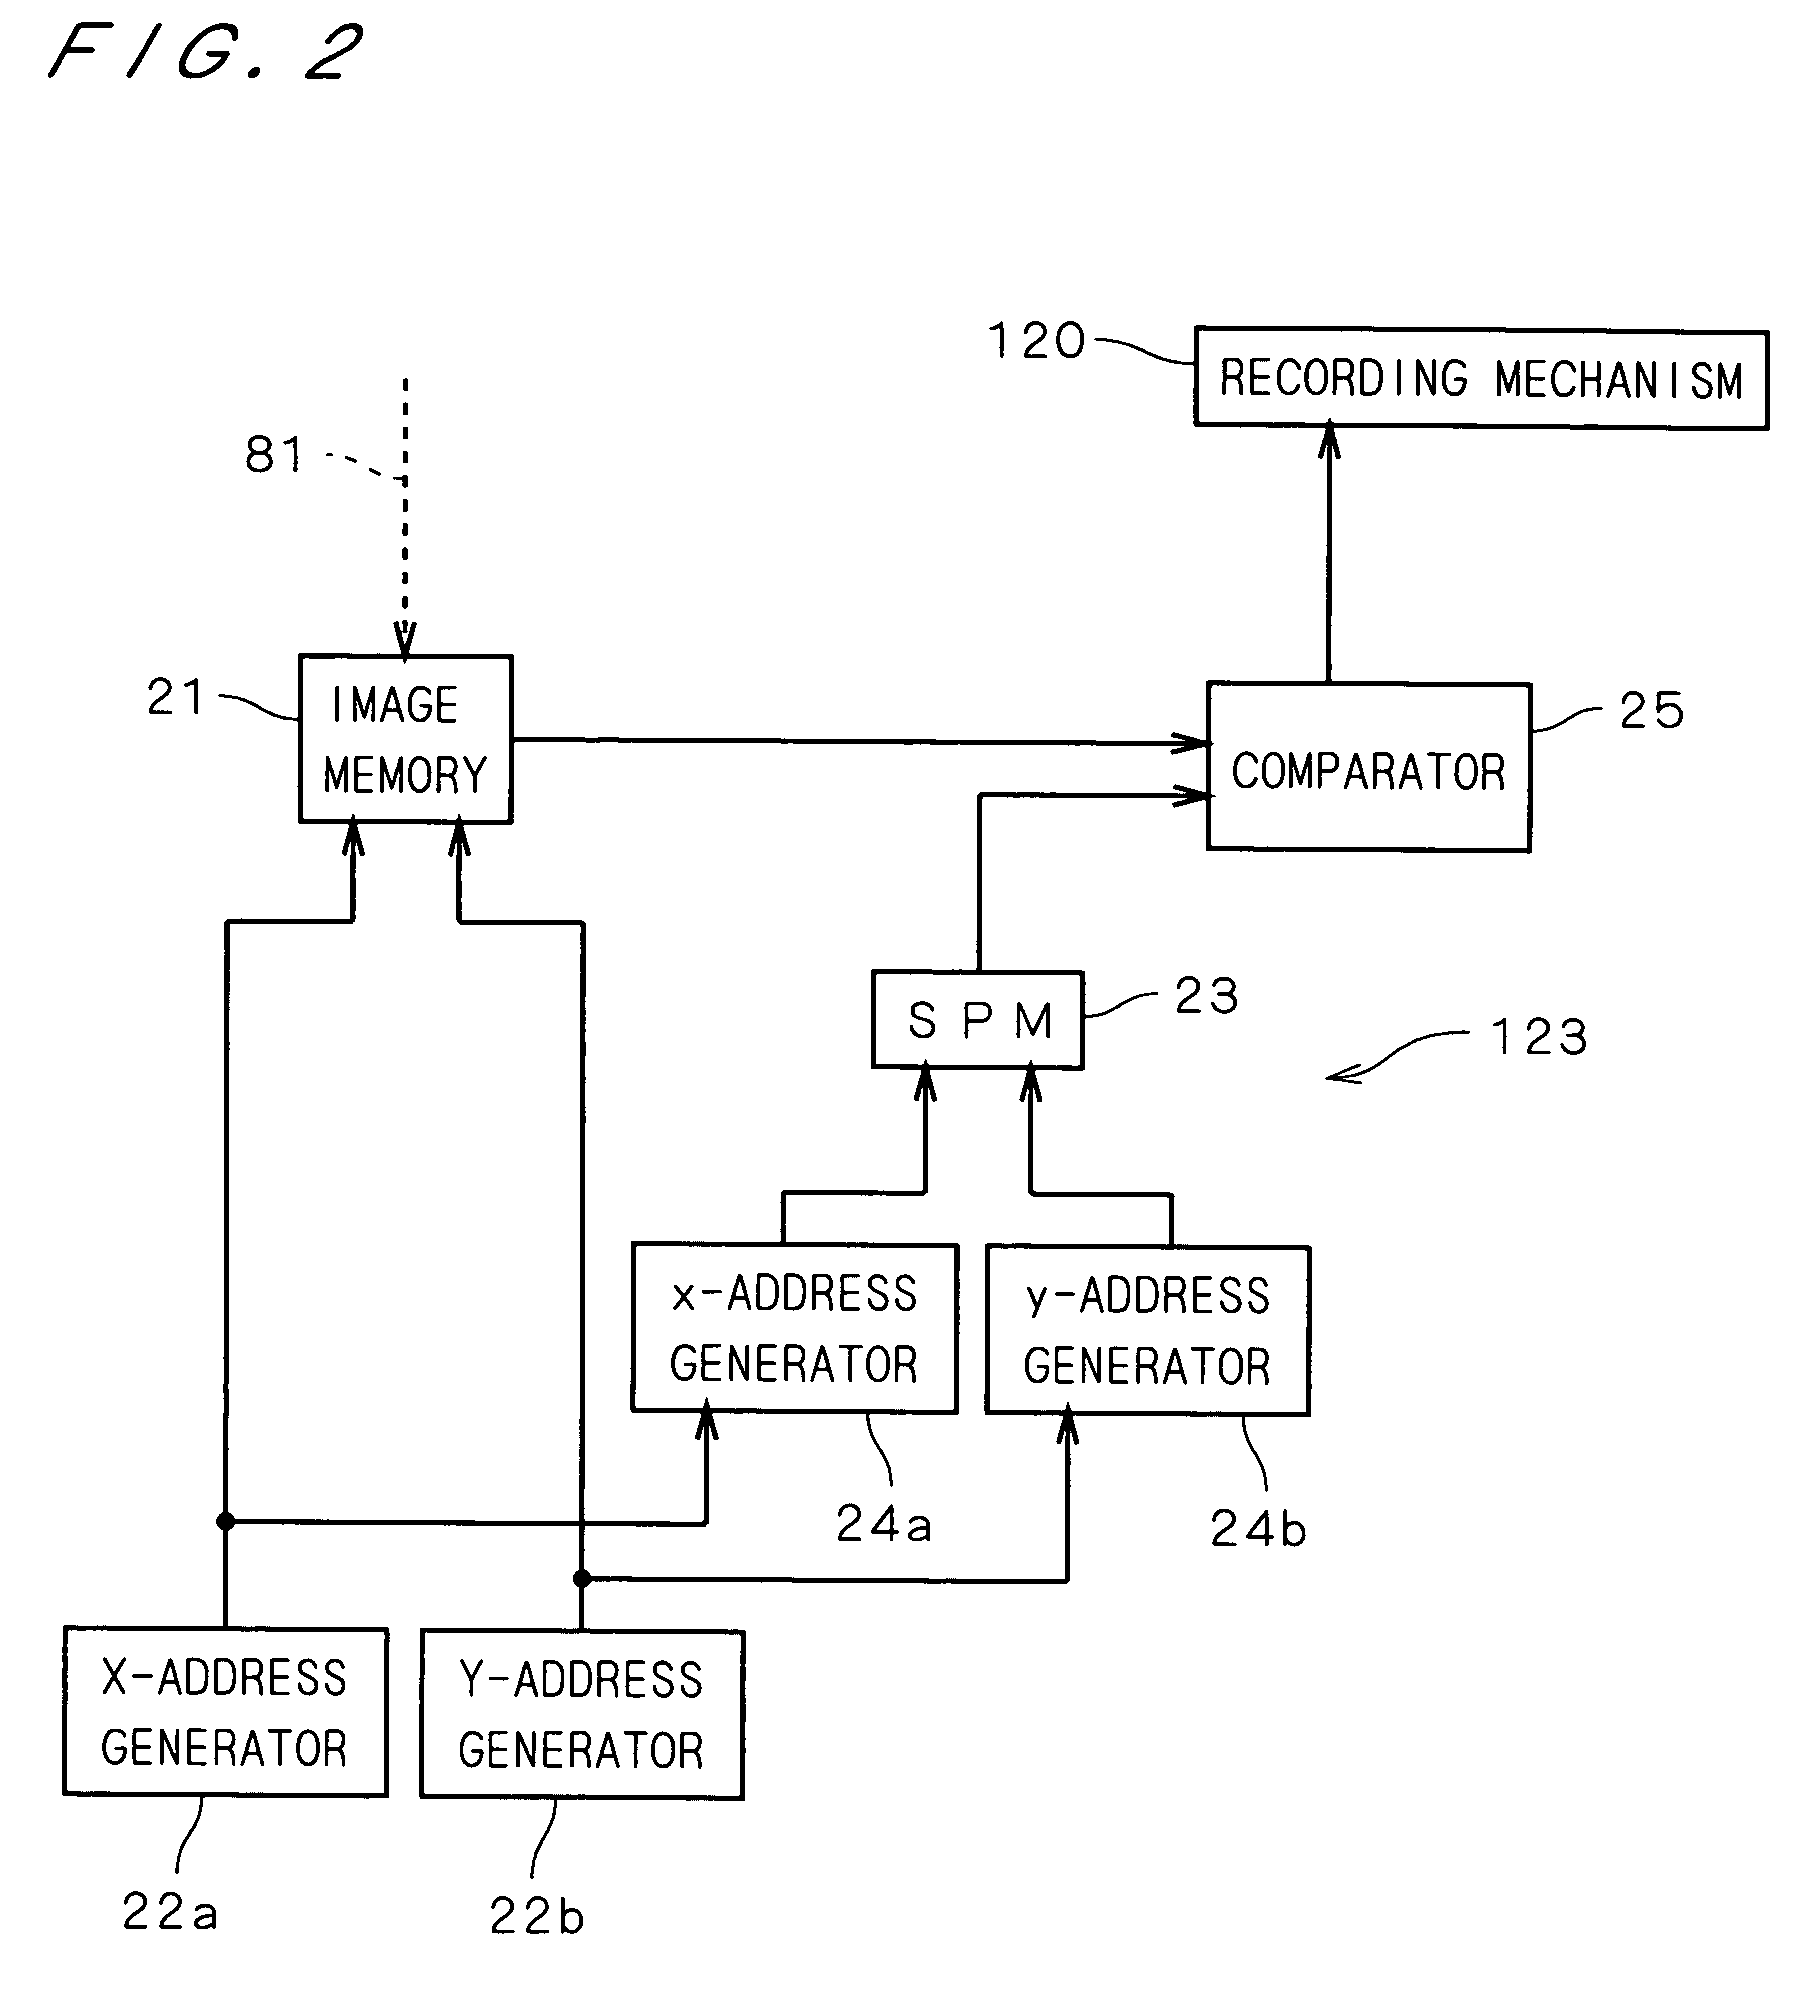 Method of generating threshold matrix for creating halftone dot image and method and apparatus for creating halftone dot image and recording medium